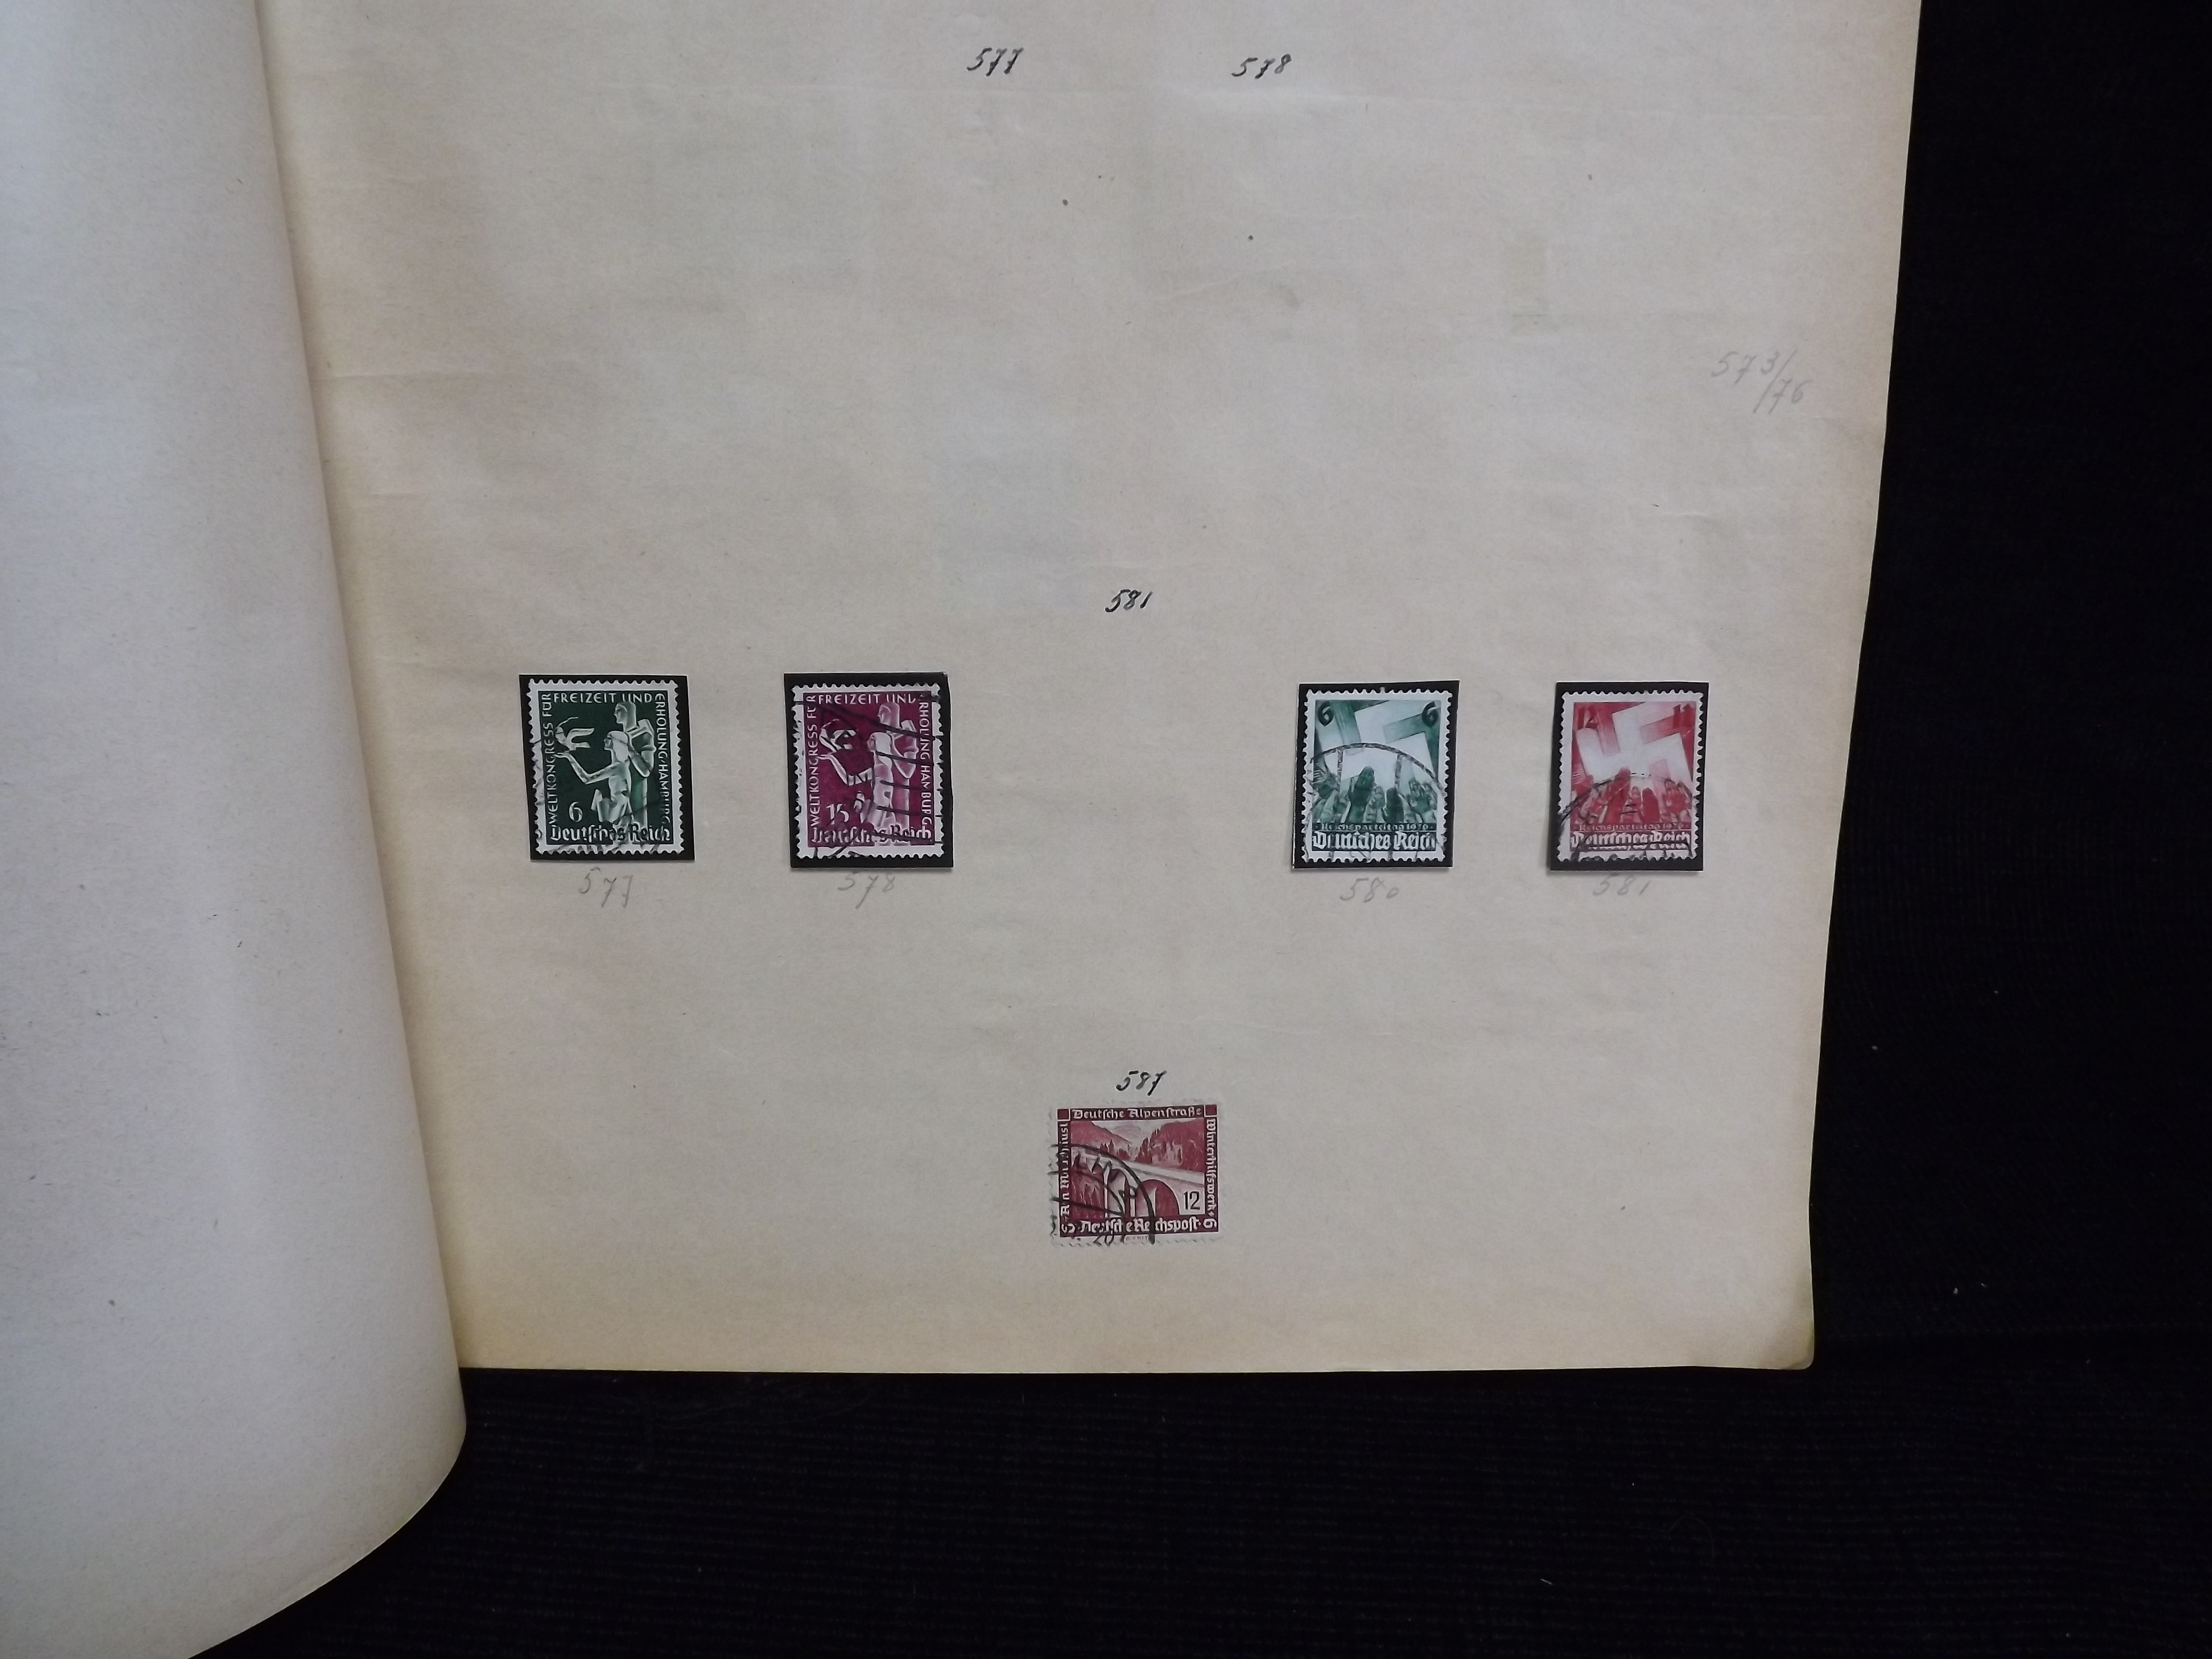 Over 500 x German Used & Mint Postage Stamps. Housed in old ledger page Album. Includes various - Image 16 of 30